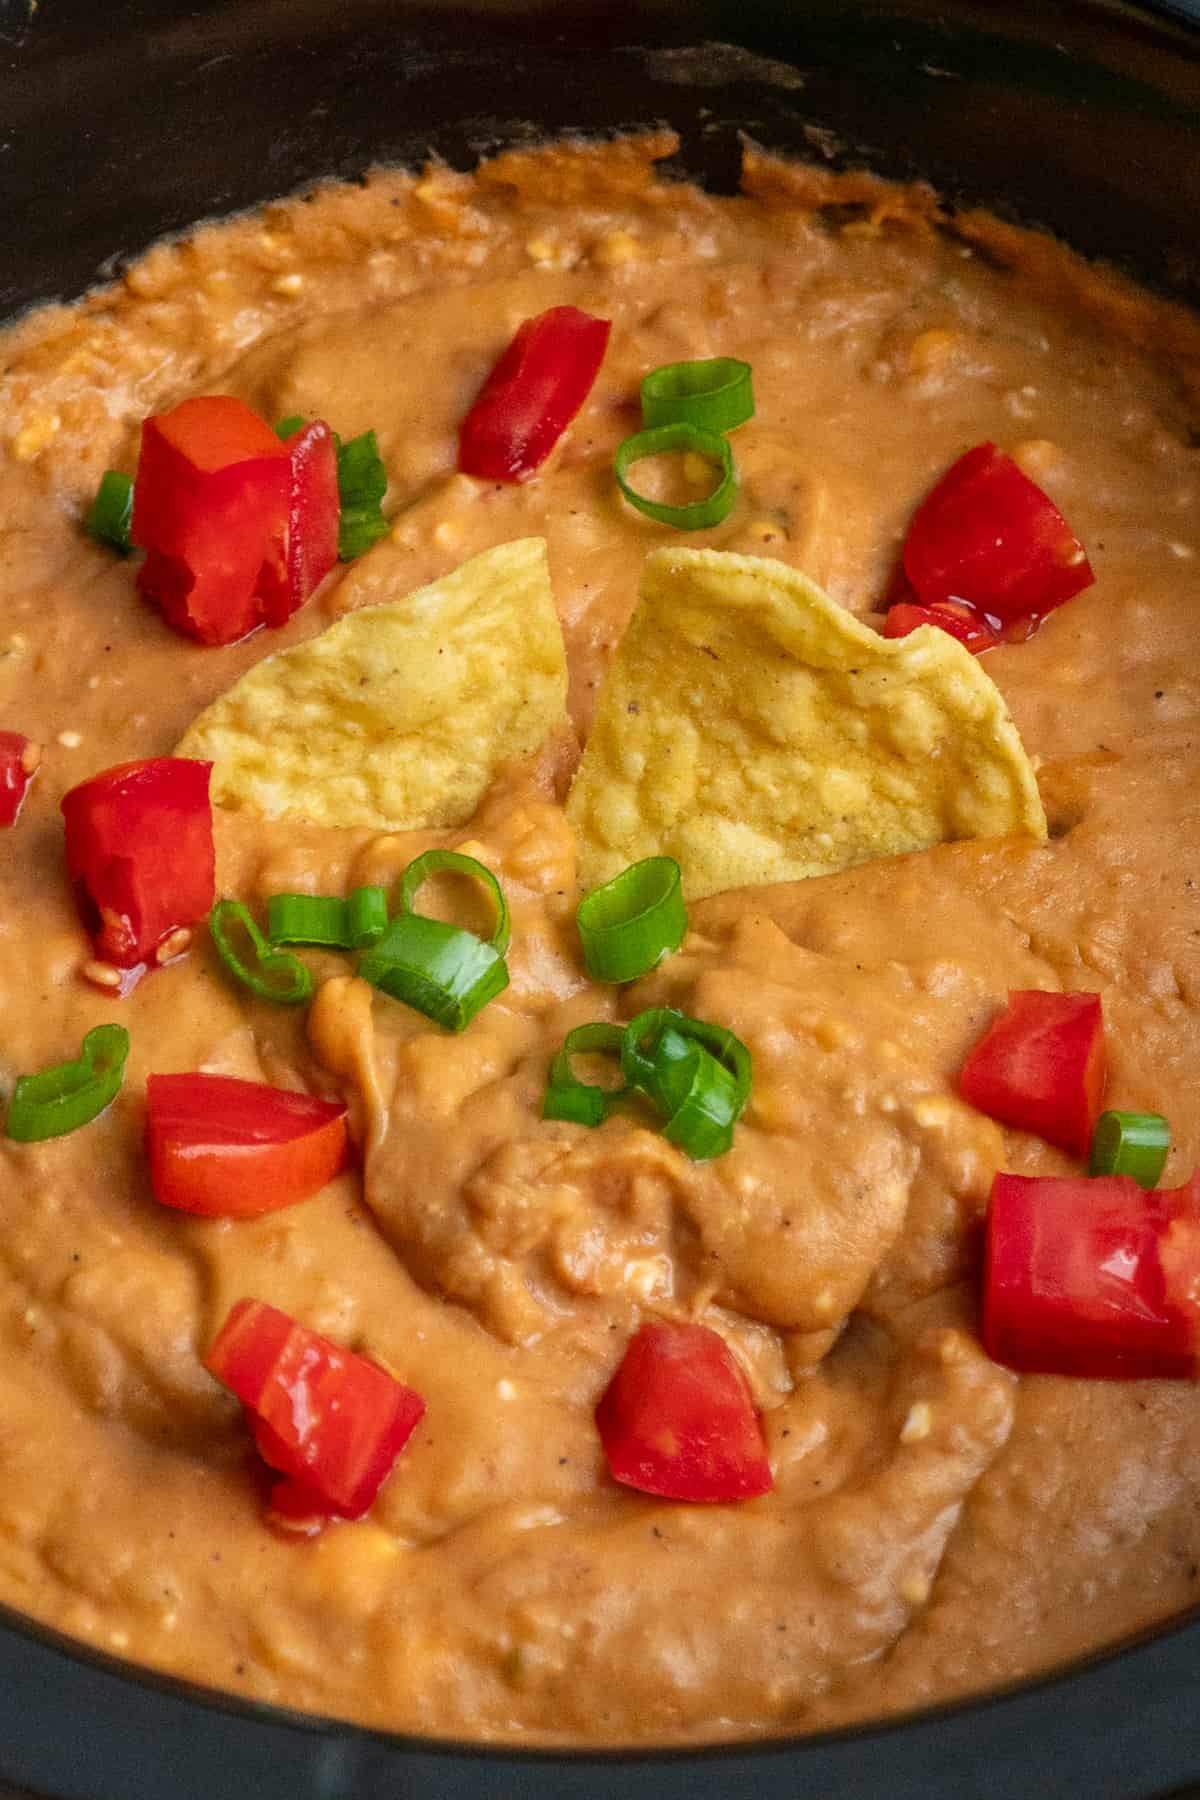 Bean dip with tomatoes and green onions on it.